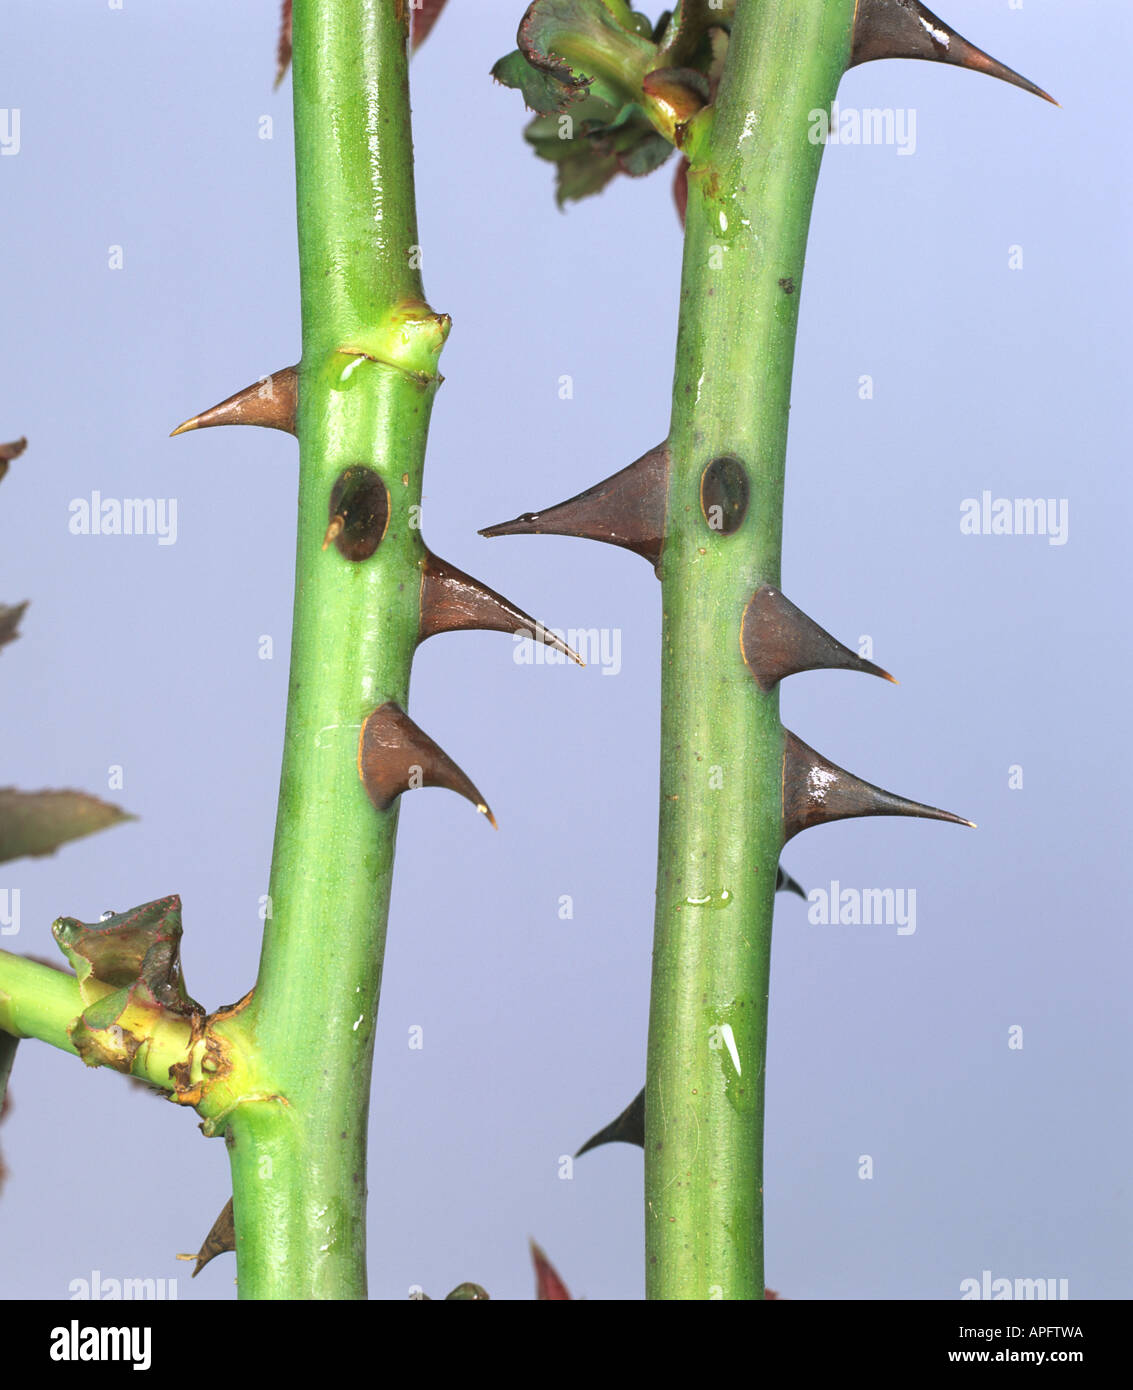 Thorns on the stem of a rose variety Albertine Stock Photo